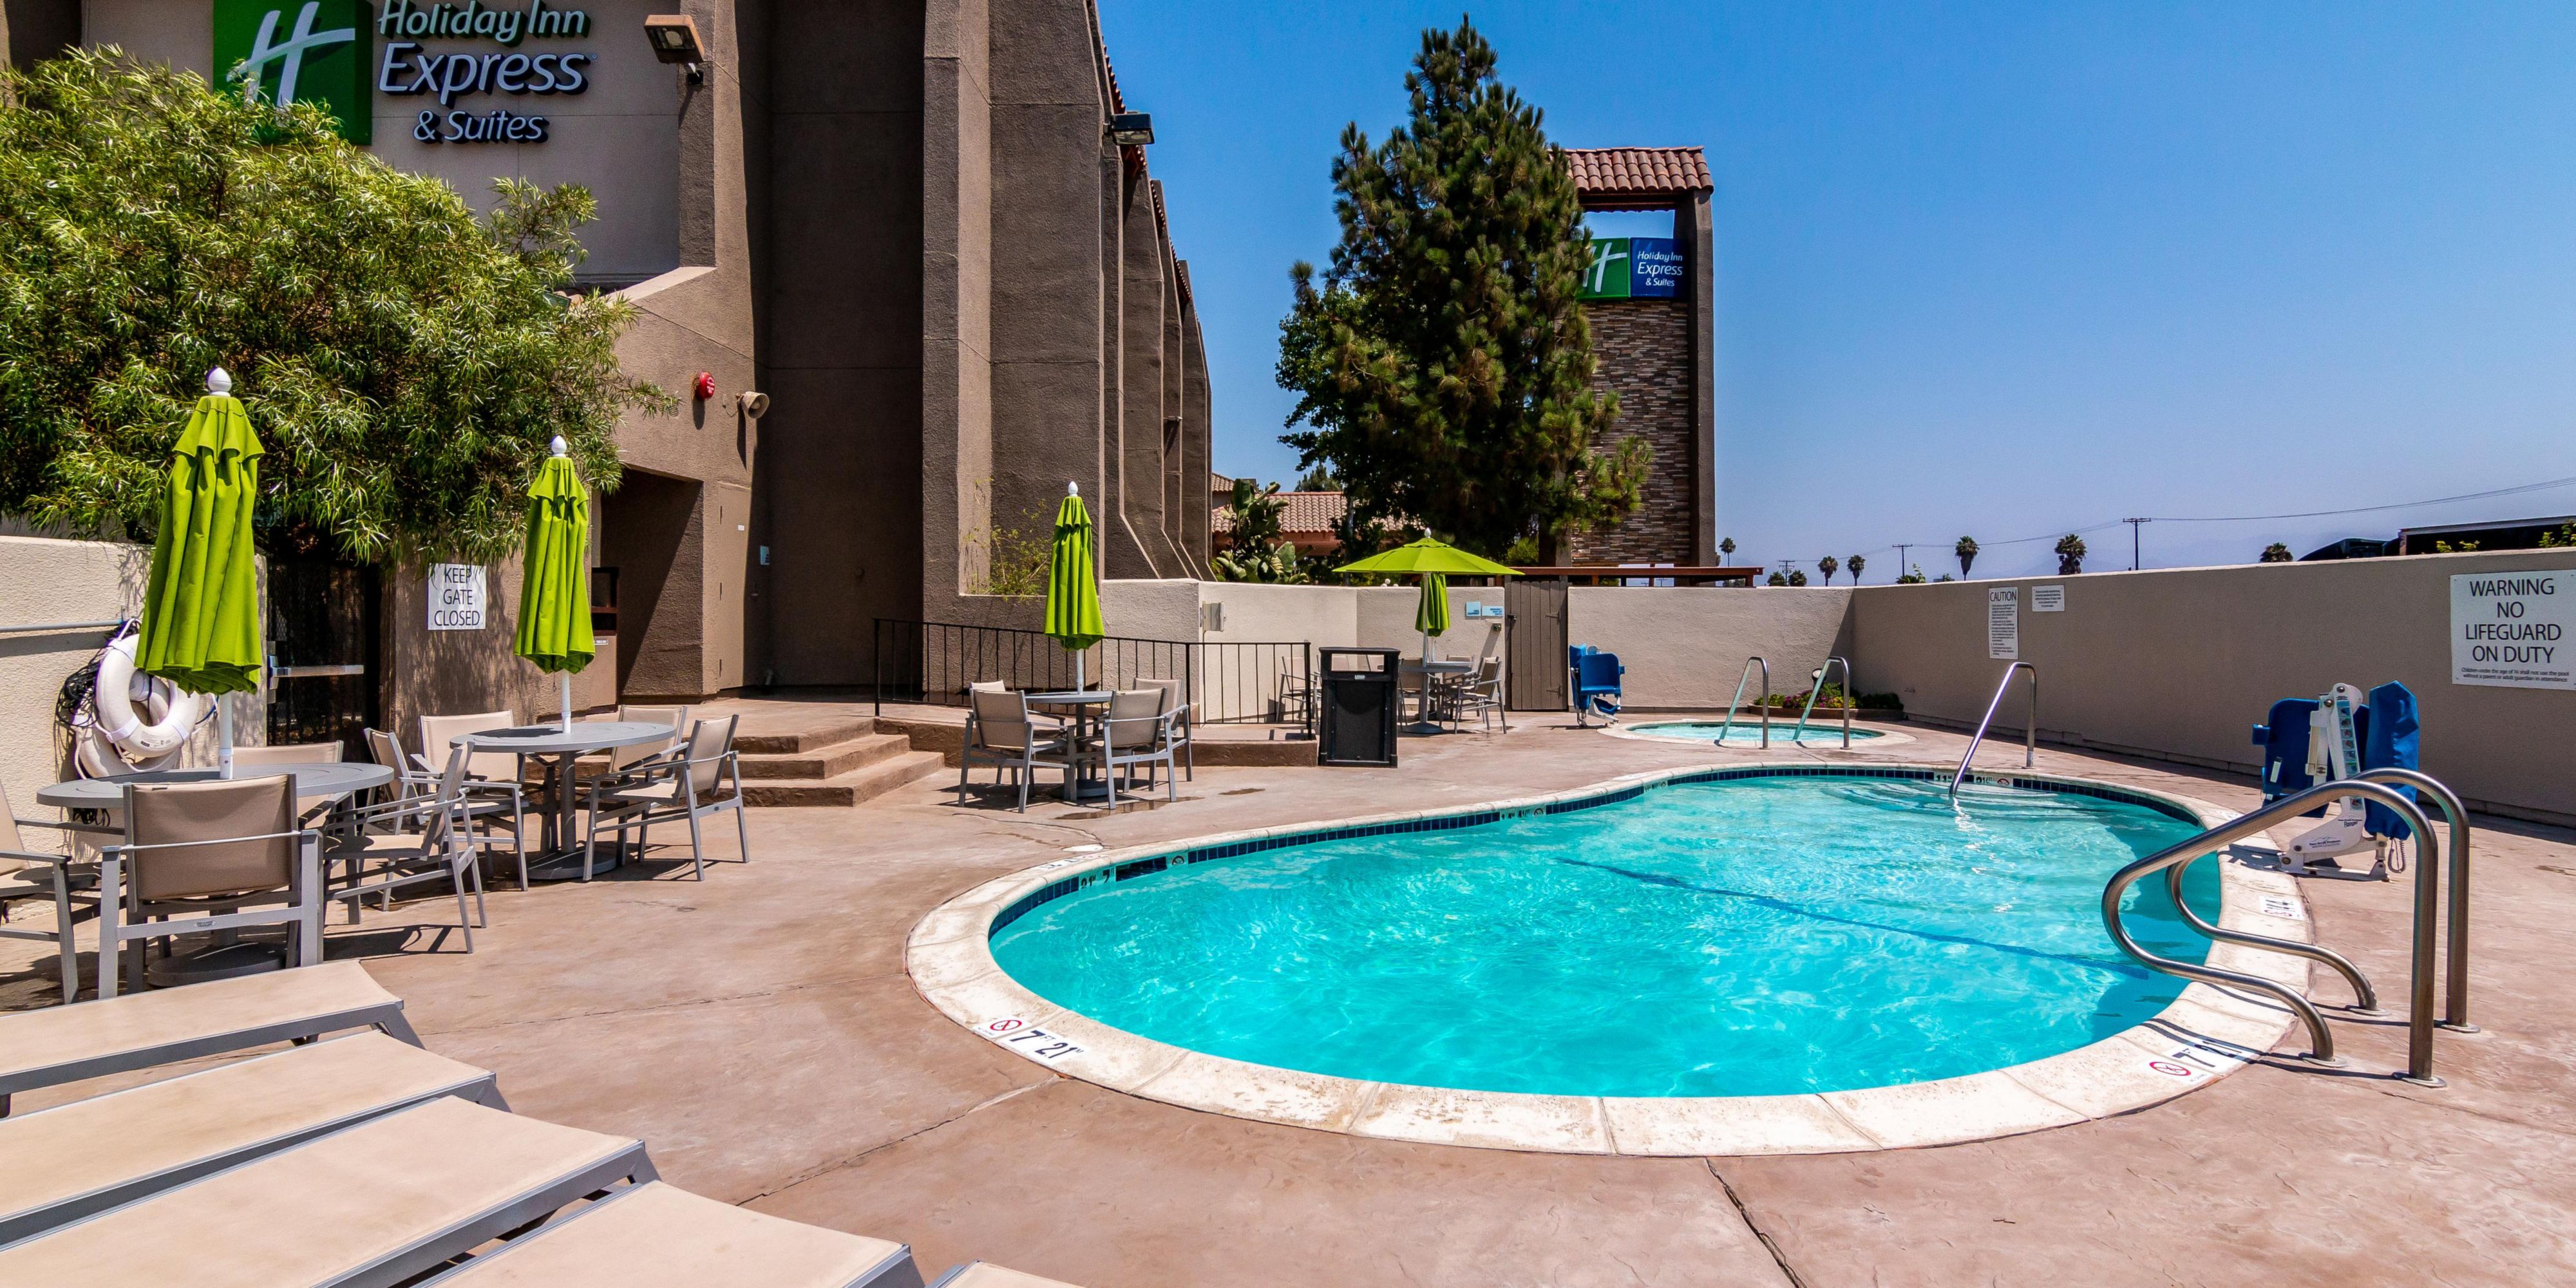 Float, relax, repeat. Spend the day poolside in our year-round heated pool. Stressful day? Our hot tub is the perfect place to unwind.